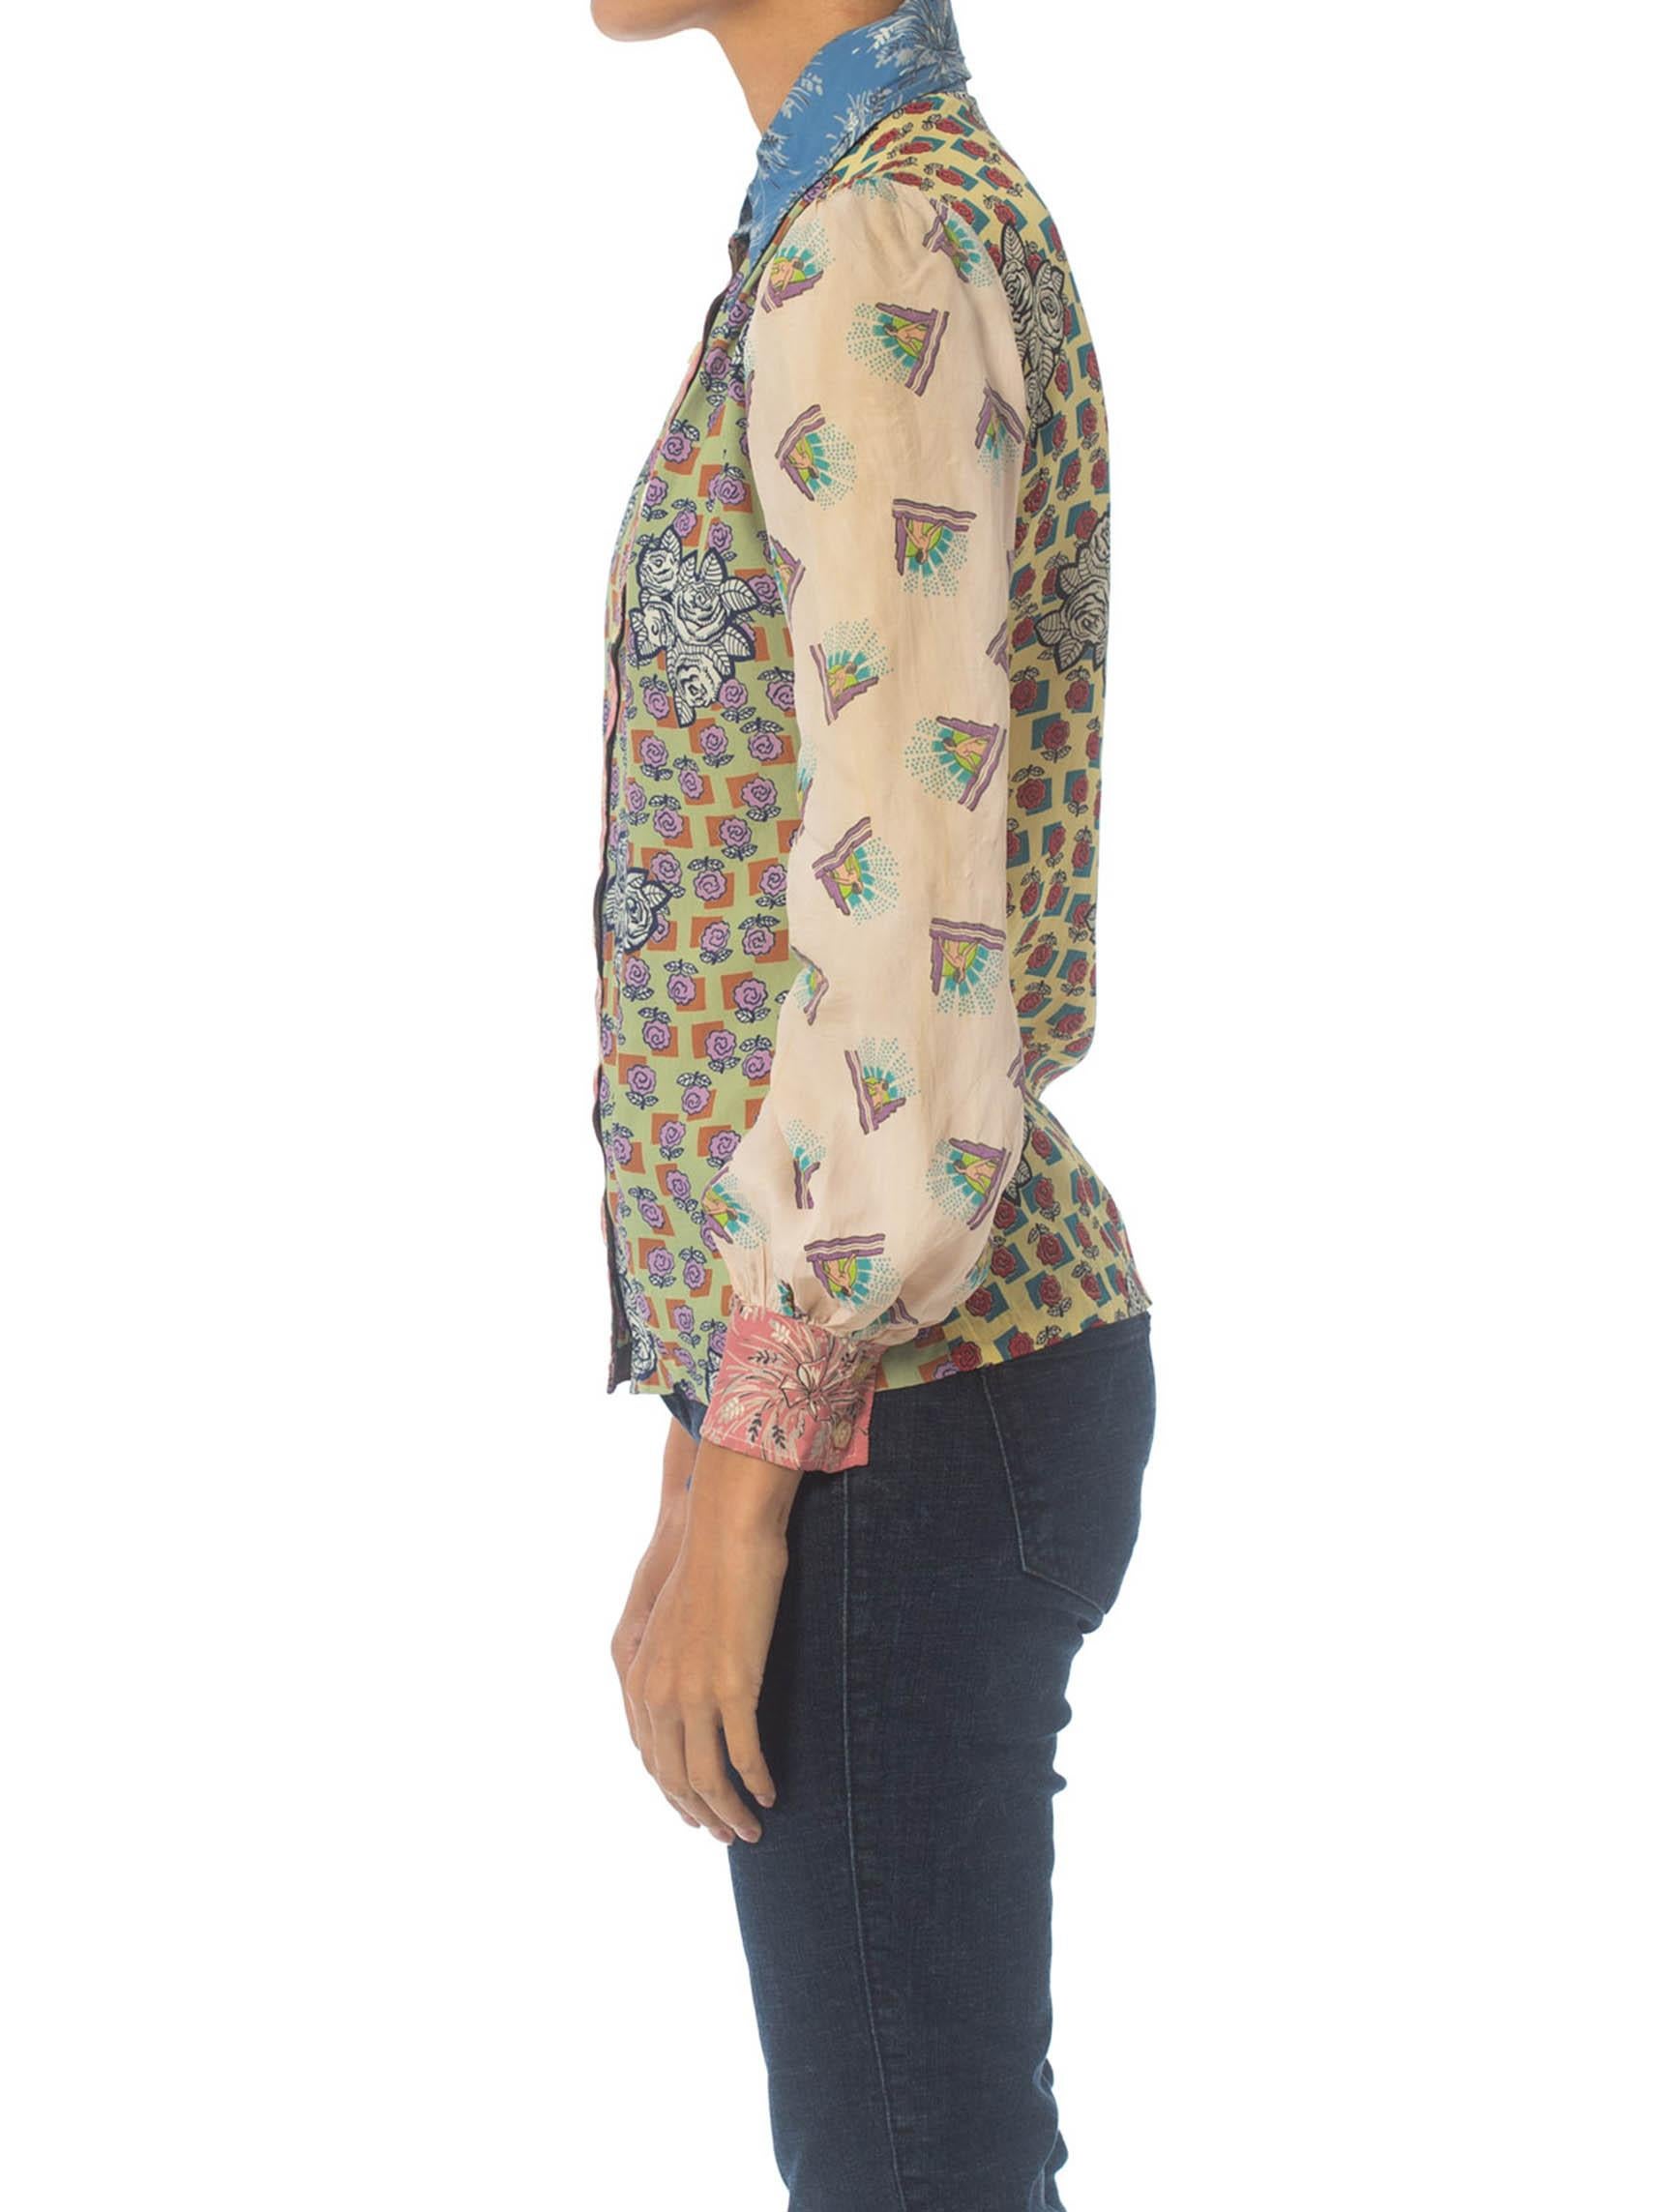 Women's 1970S Rayon Patchwork Print Shirt Made From 1940S Vintage Prints